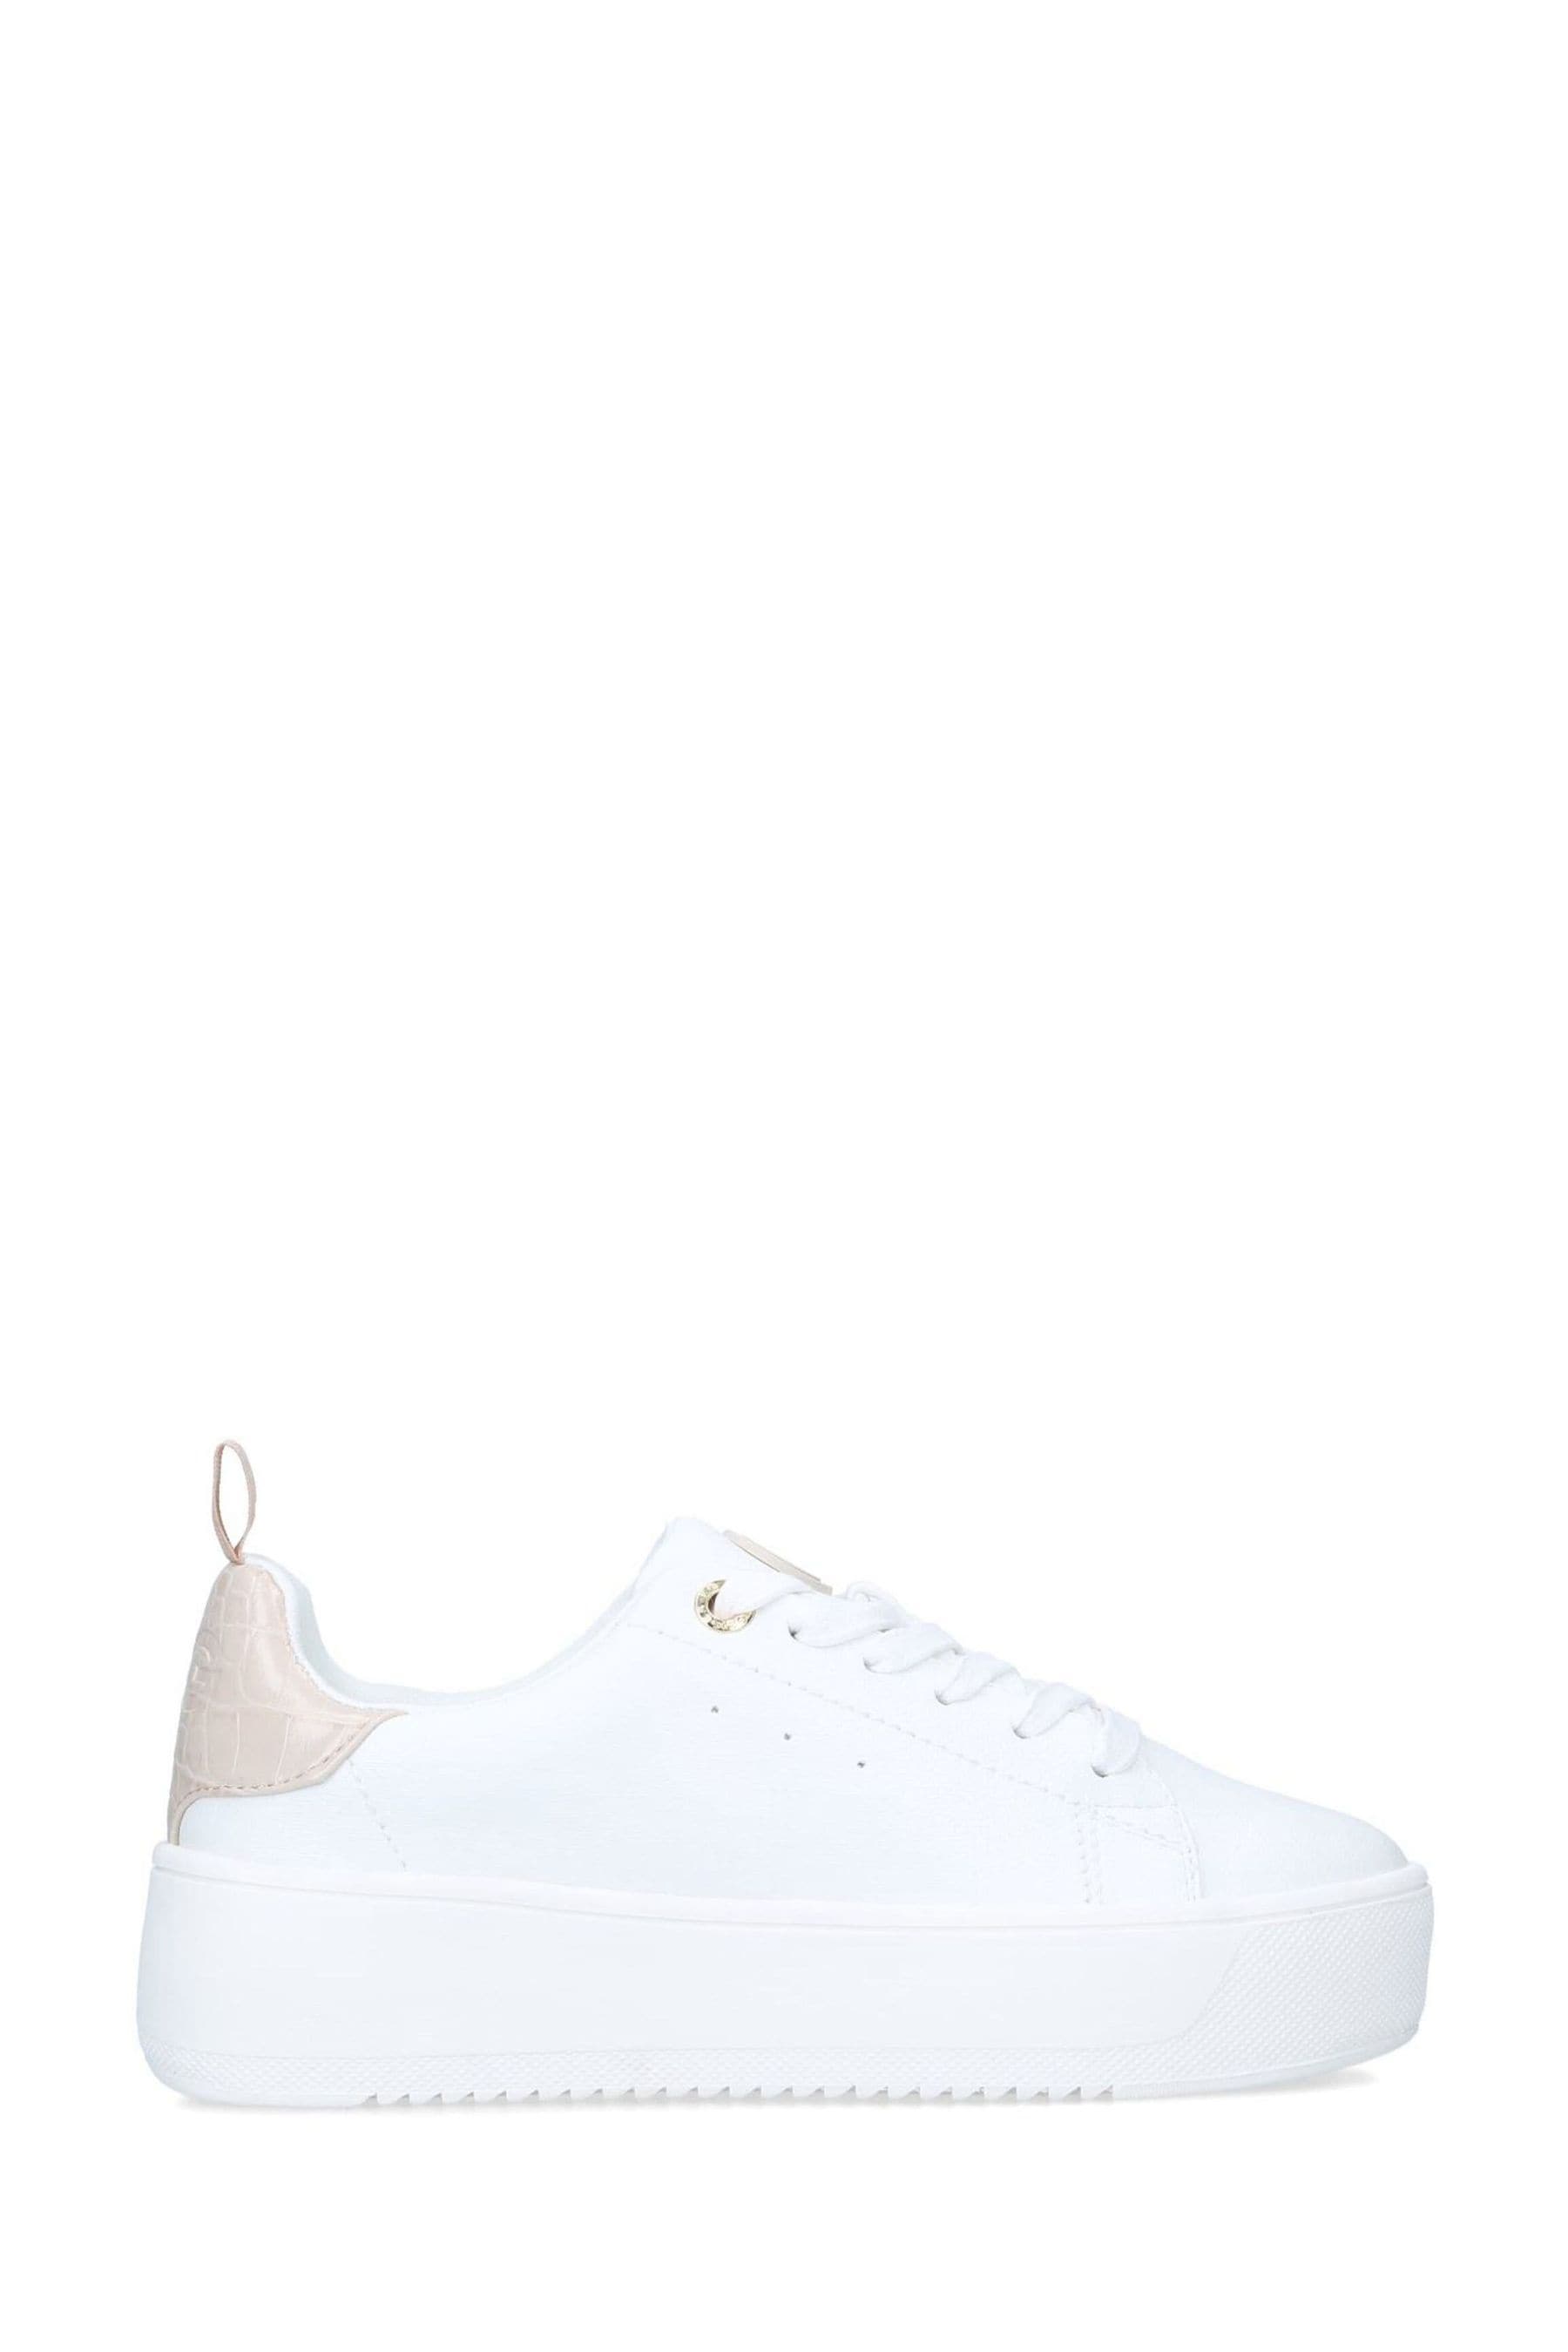 Buy KG Kurt Geiger Vegan Lighter Lace-Up Trainers from the Next UK ...